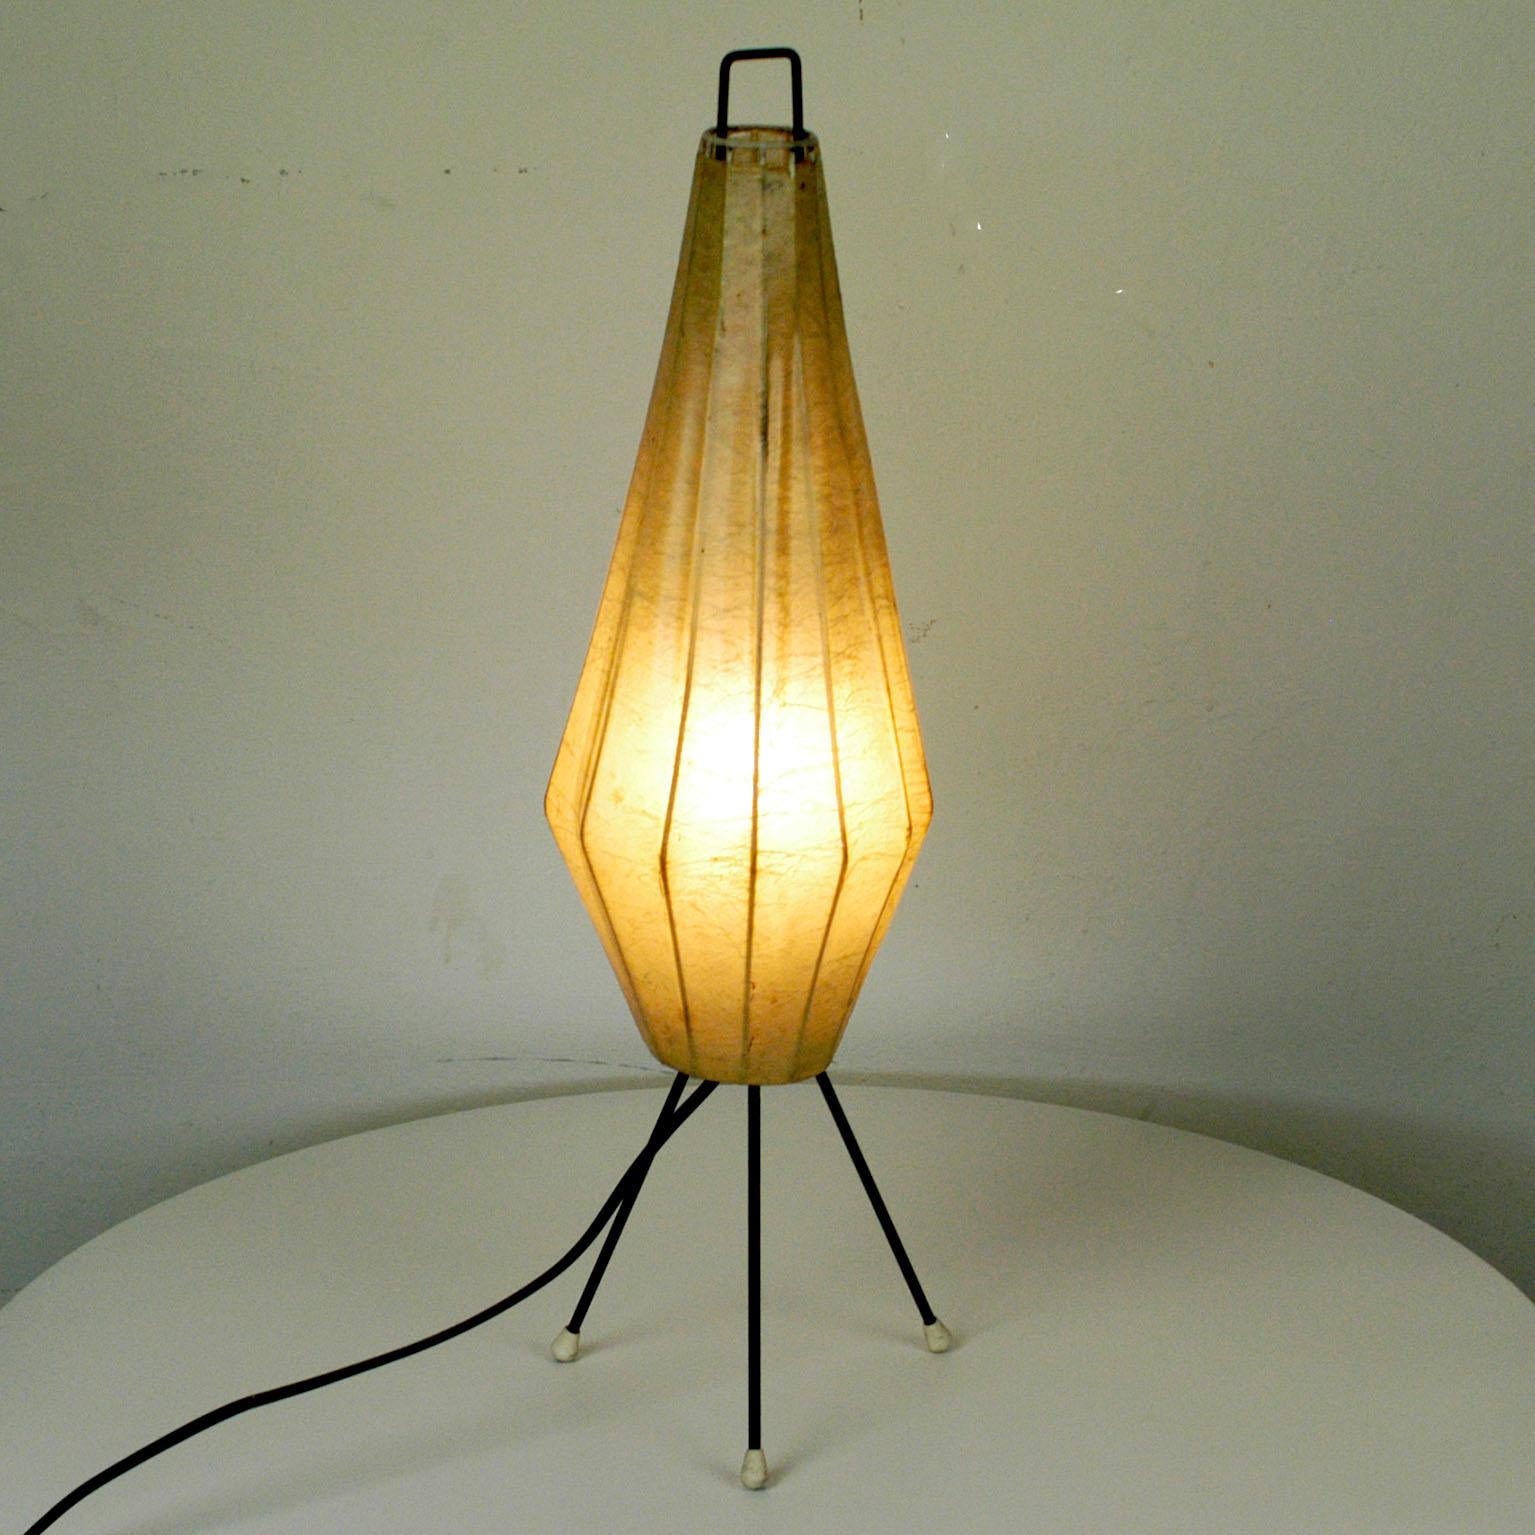 Charming midcentury tripod table lamp with cocoon shade and black lacquered metal base, one E14 light socket.